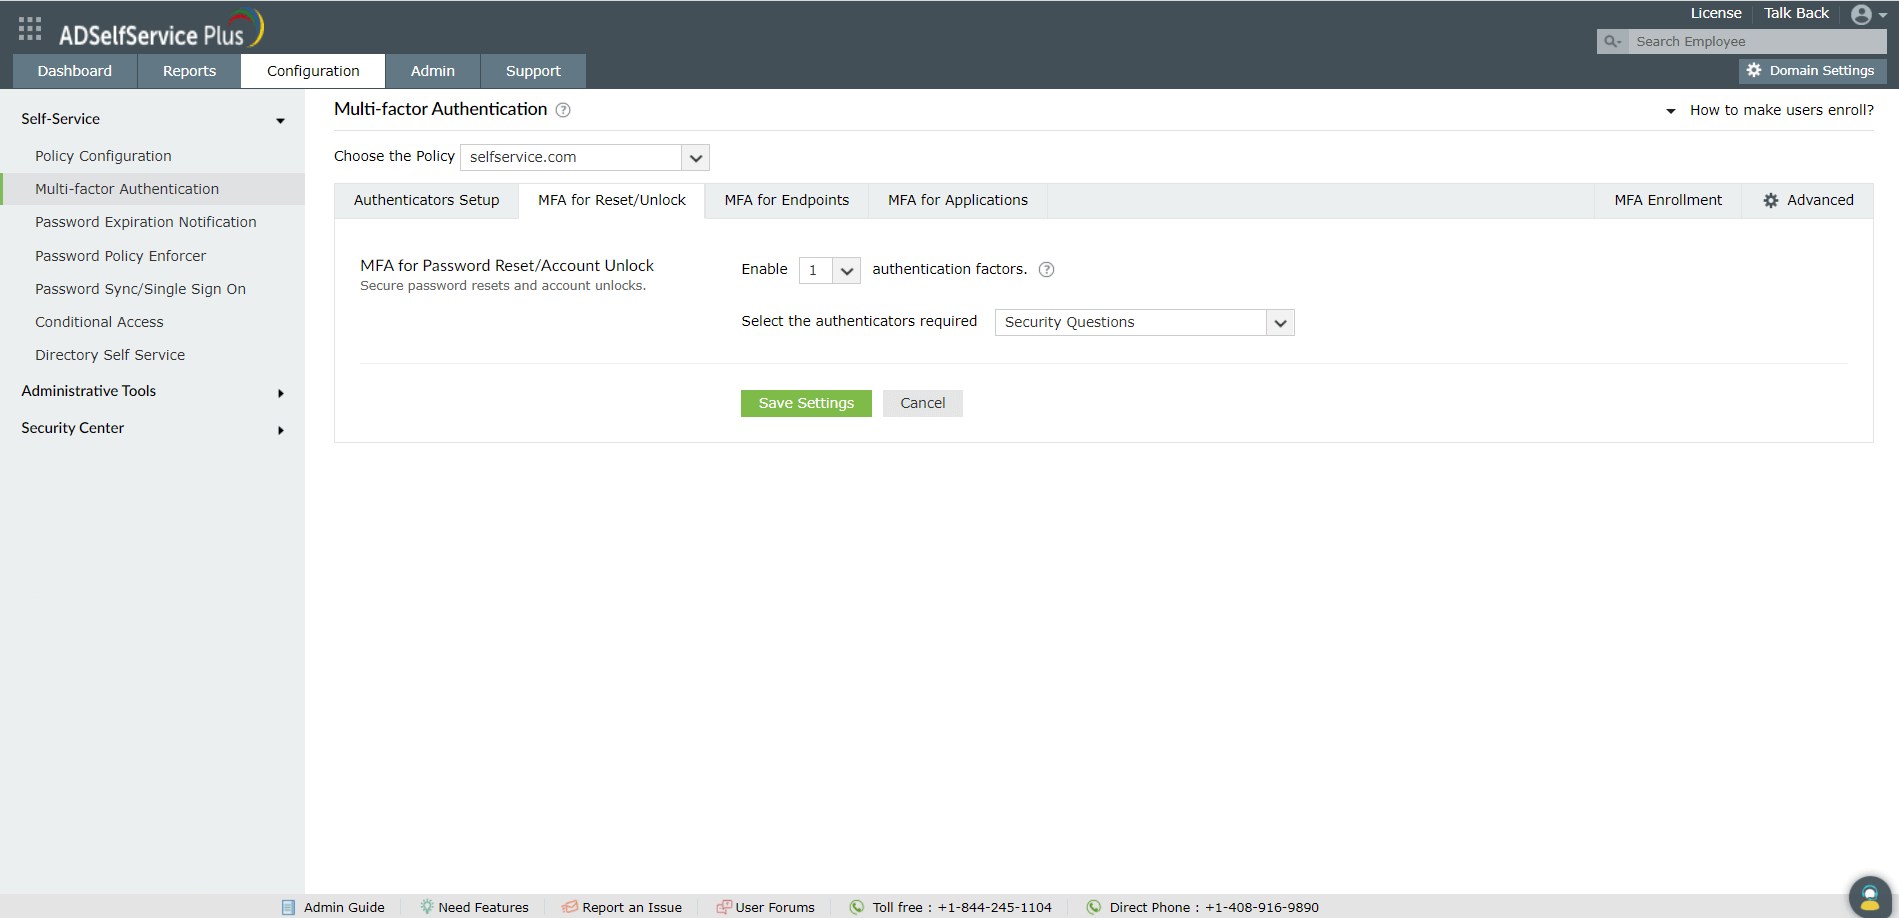 Steps to enable MFA for ADSelfService Plus